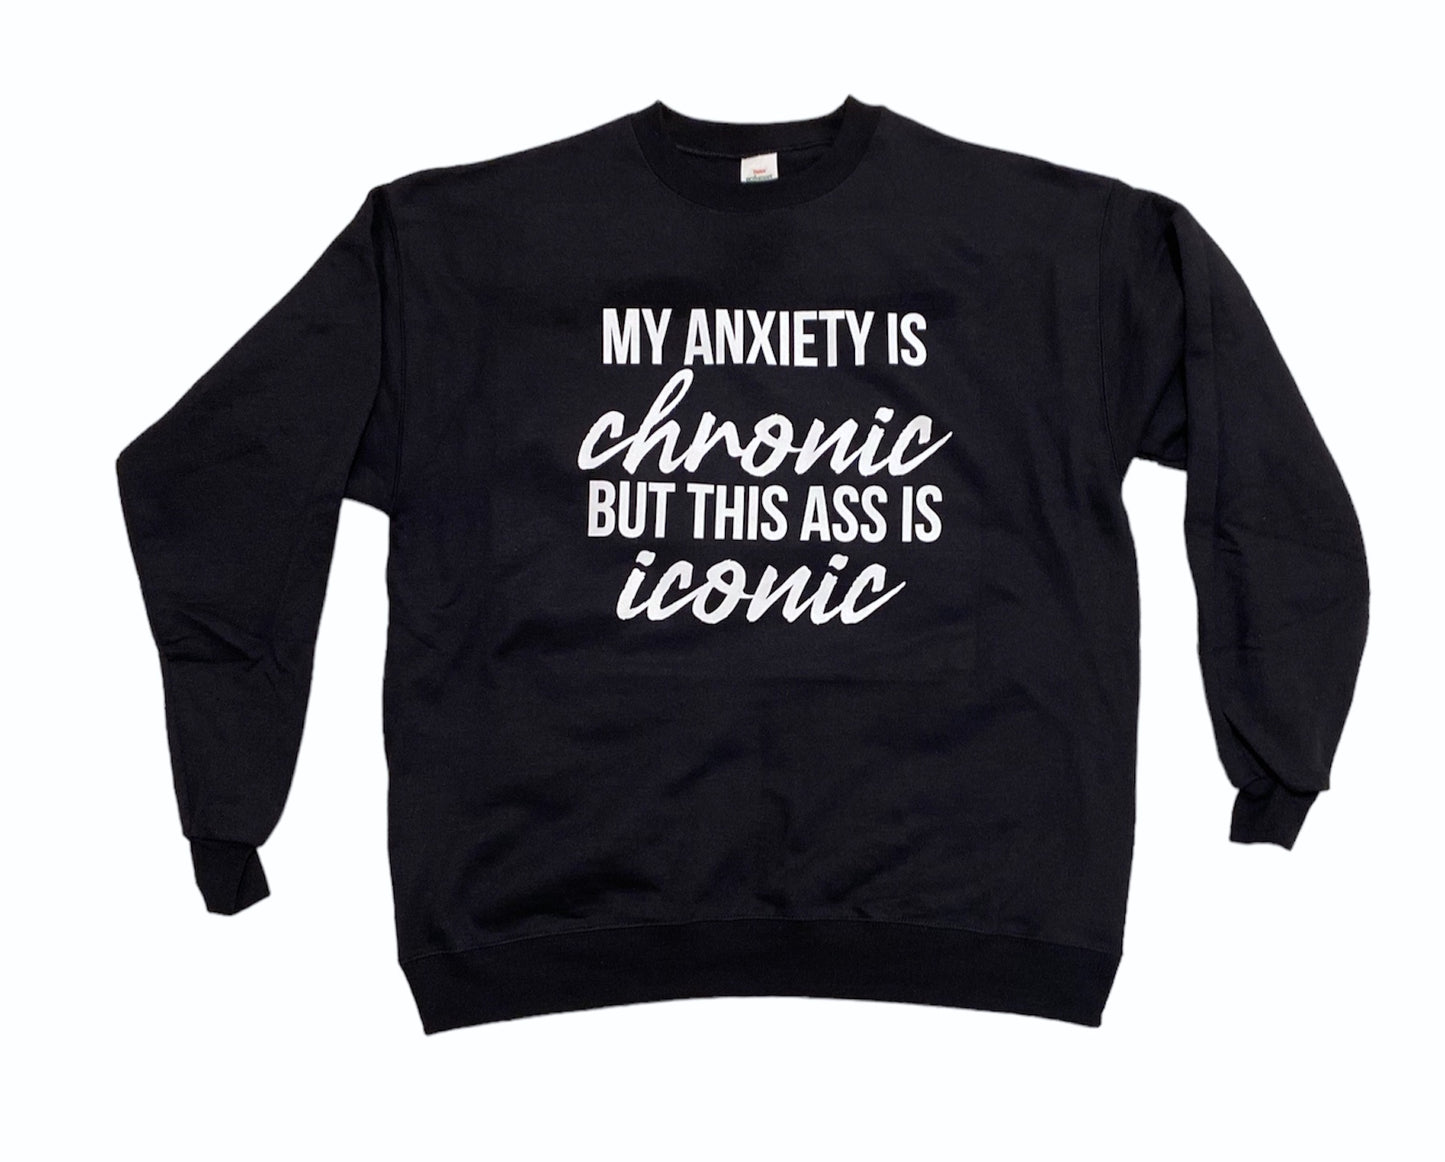 My anxiety is chronic but this ass is iconic sweatshirt